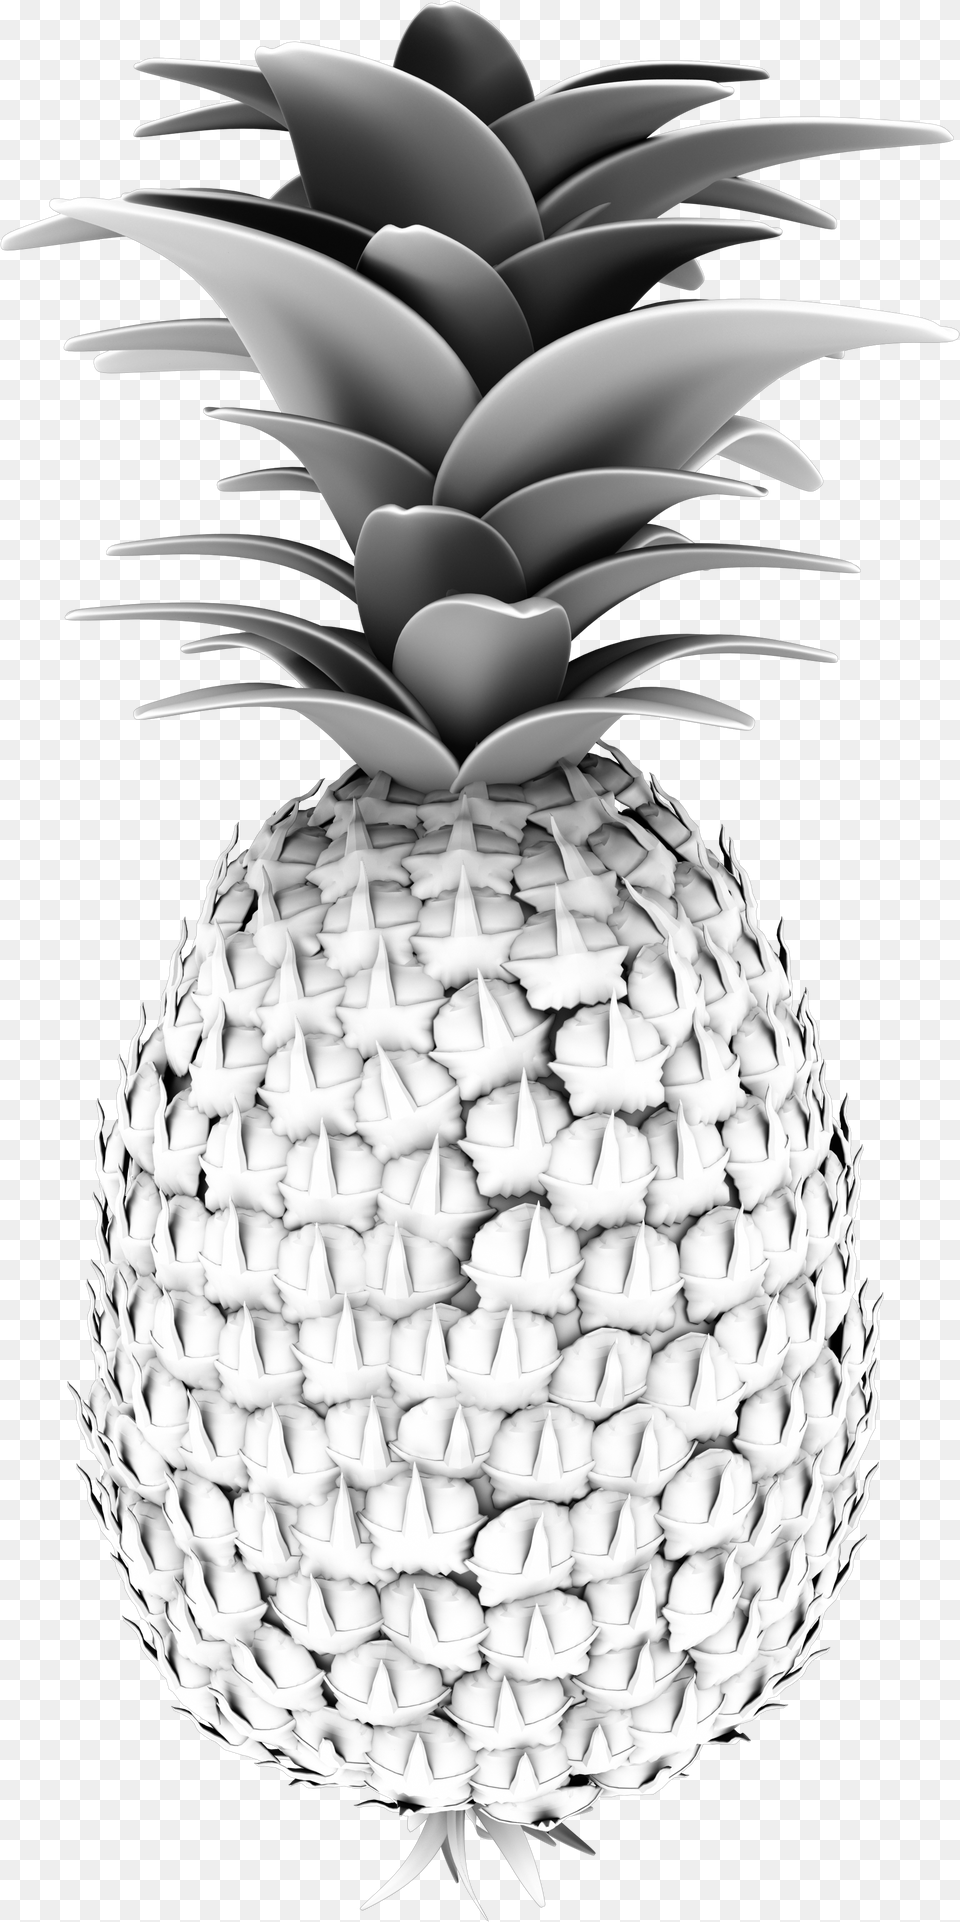 Oryza 01 Lit Pineapple, Food, Fruit, Plant, Produce Png